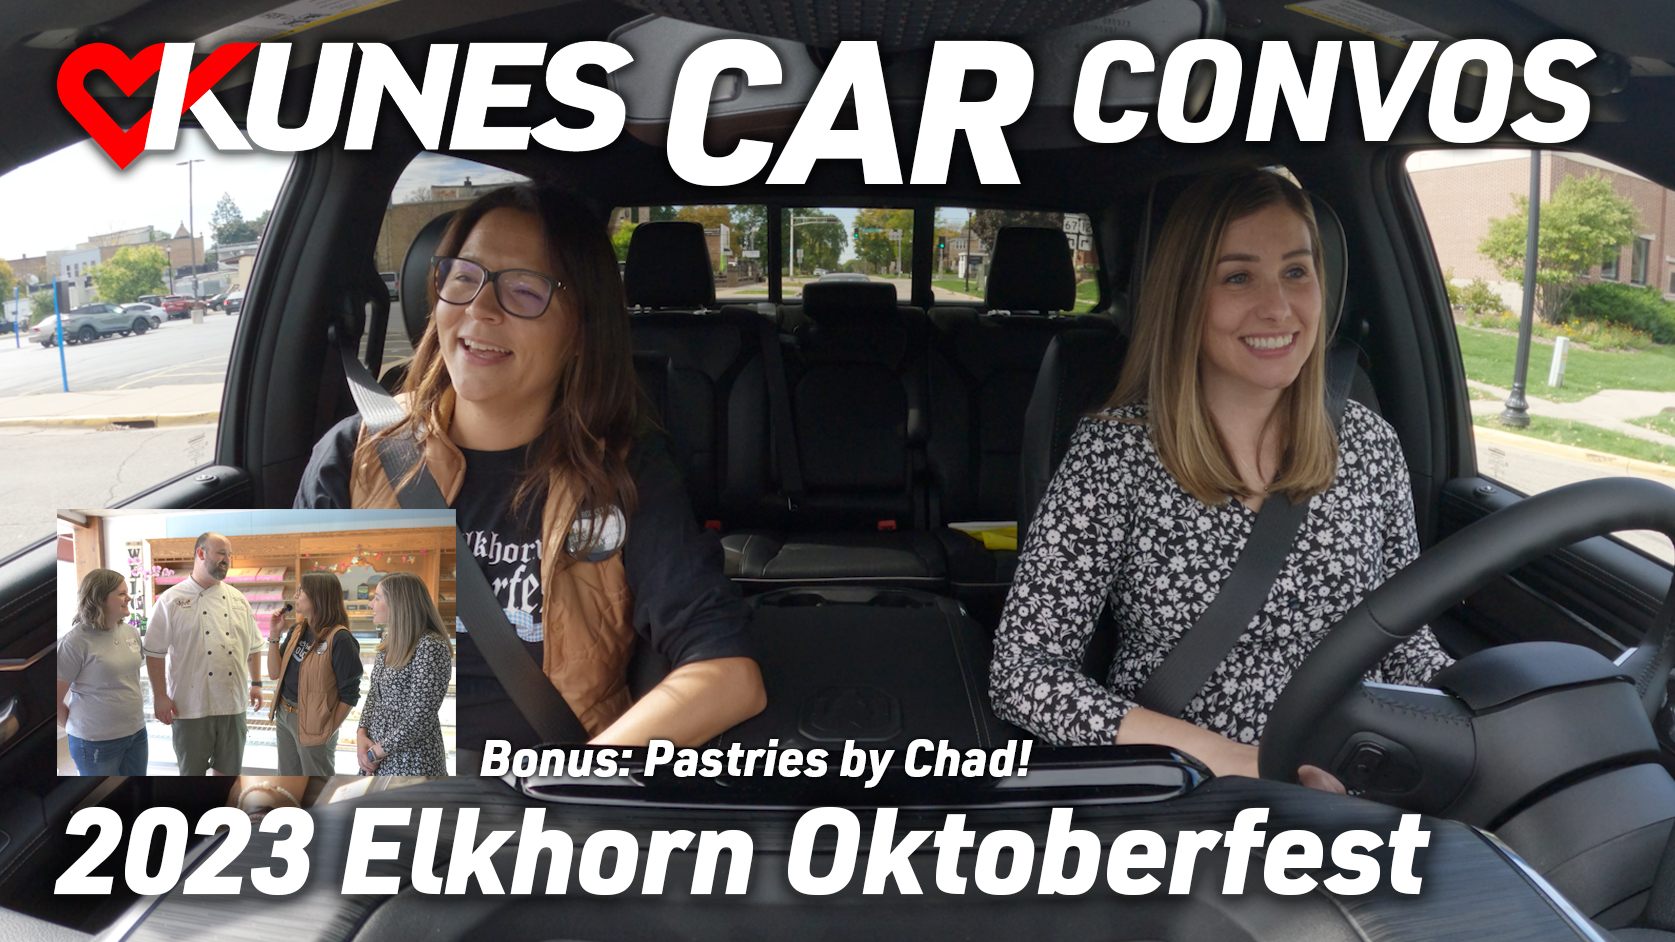 Pictured from left to right: Kate Abbe, from Elkhorn Area Chamber of Commerce, and Megan Swaney, Marketing Manager at Kunes Auto Gorup; Smaller image of Samantha and Chad Visger of Pastries by Chad in Elkhorn, WI; Text reads: Kunes Car Convos; Bonus: Pastries by Chad; 2023 Elkhorn Oktoberfest